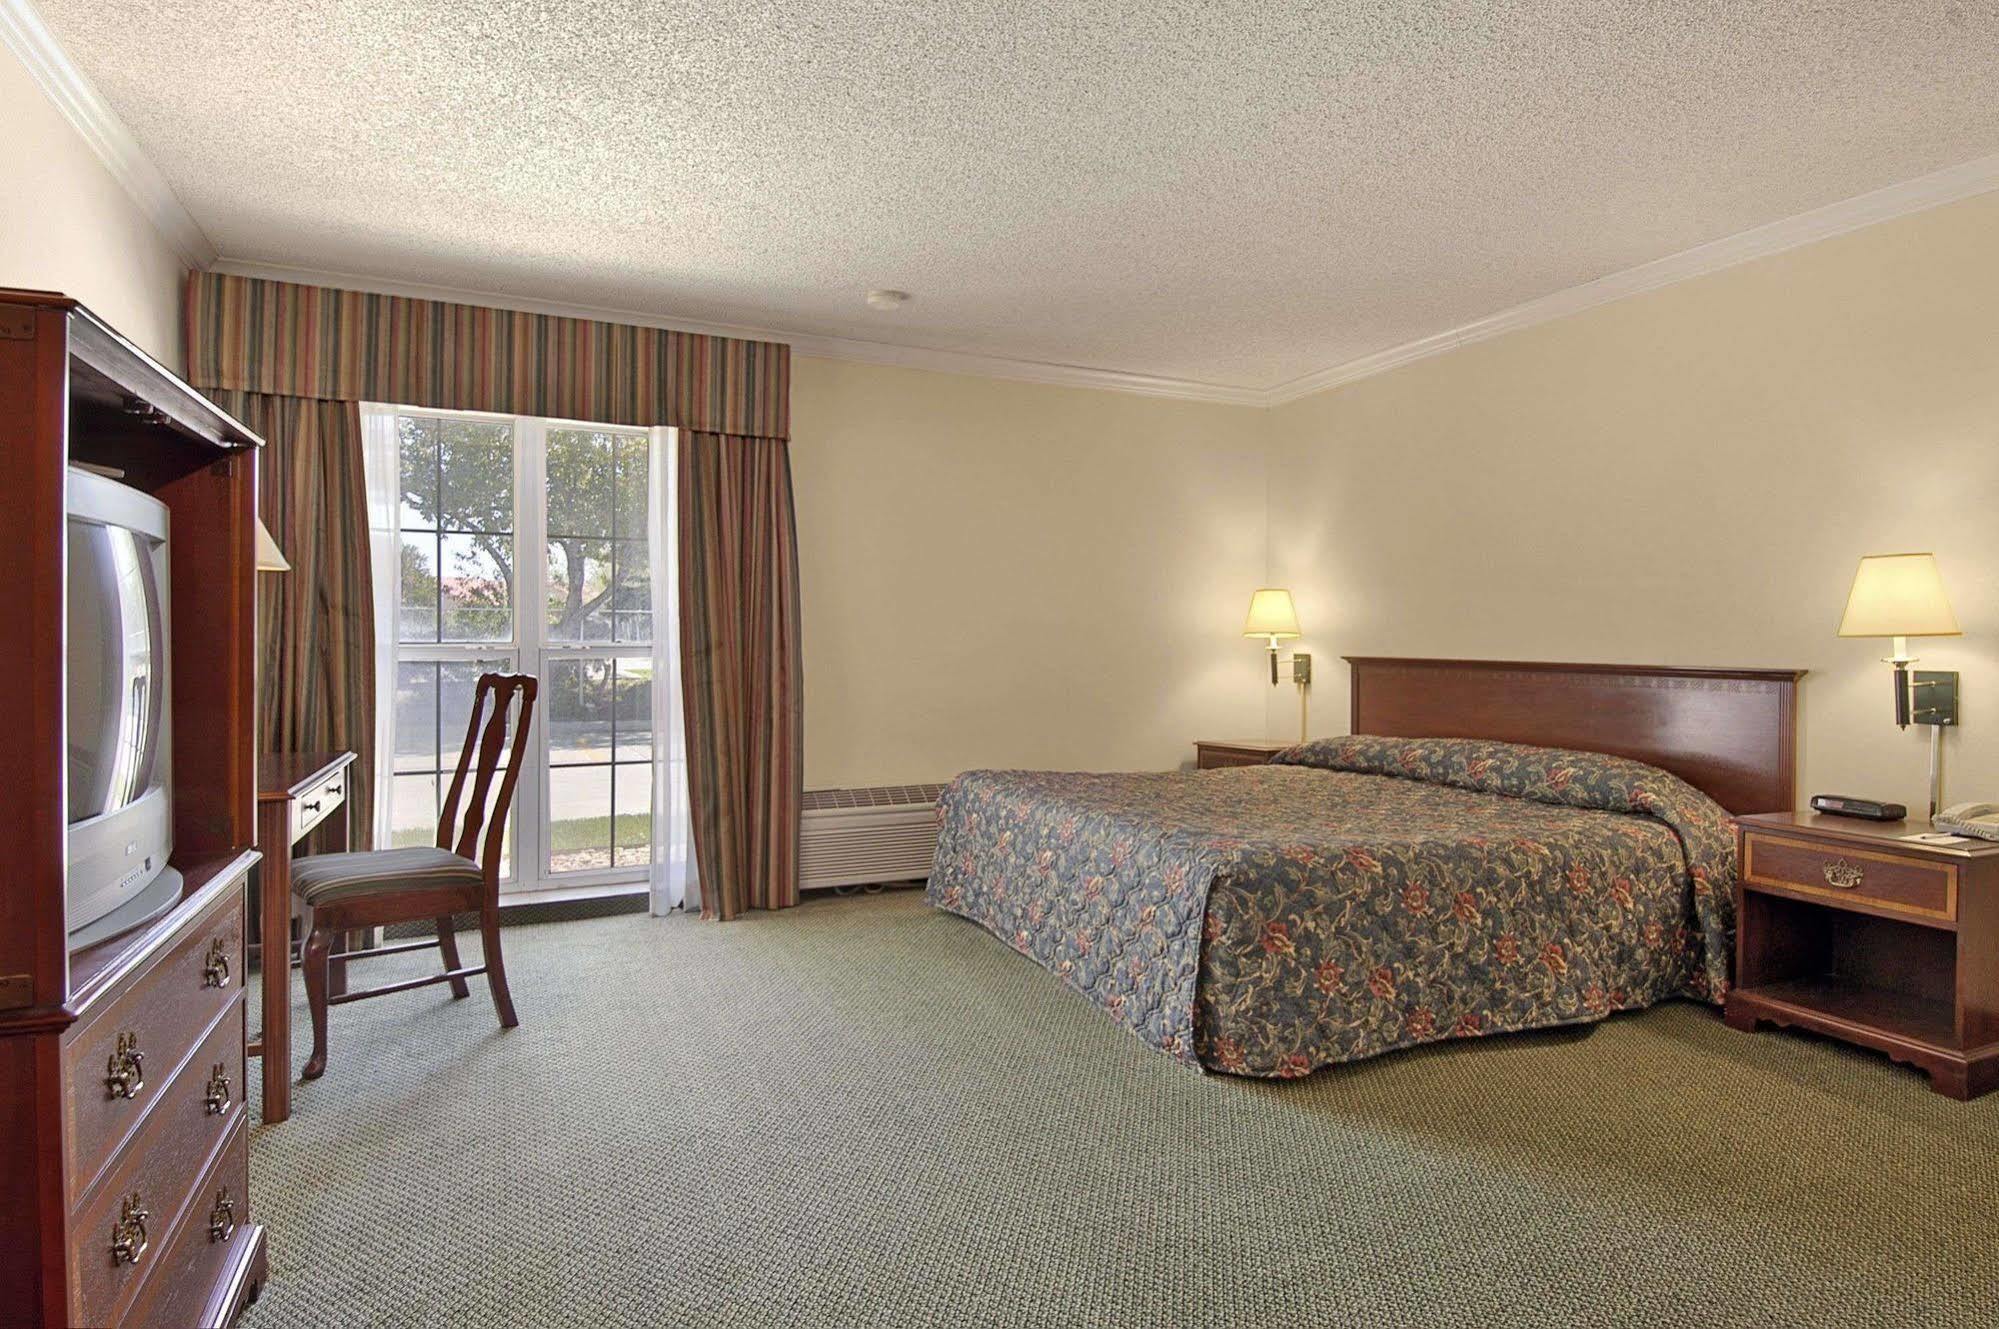 Extend-A-Suites - Extended Stay, I-40 Amarillo West Zimmer foto